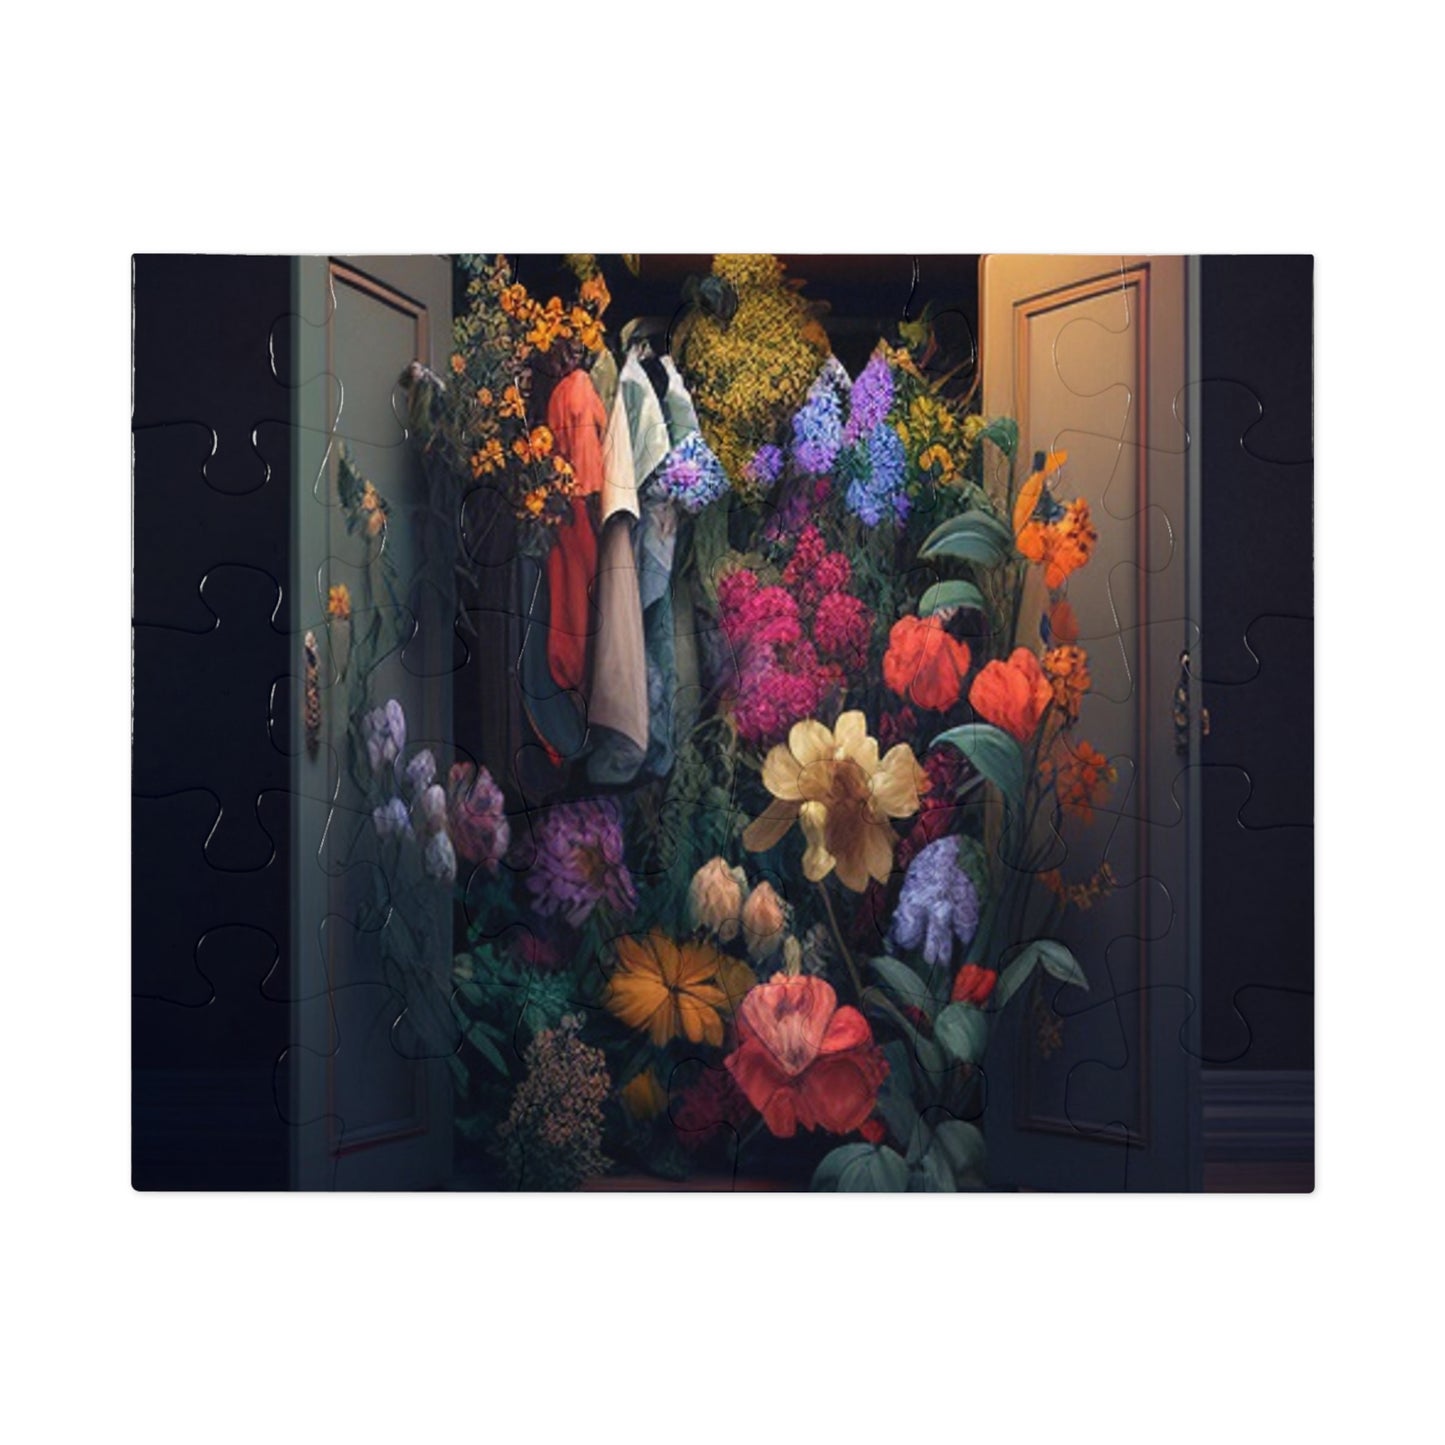 Jigsaw Puzzle (30, 110, 252, 500,1000-Piece) A Wardrobe Surrounded by Flowers 4